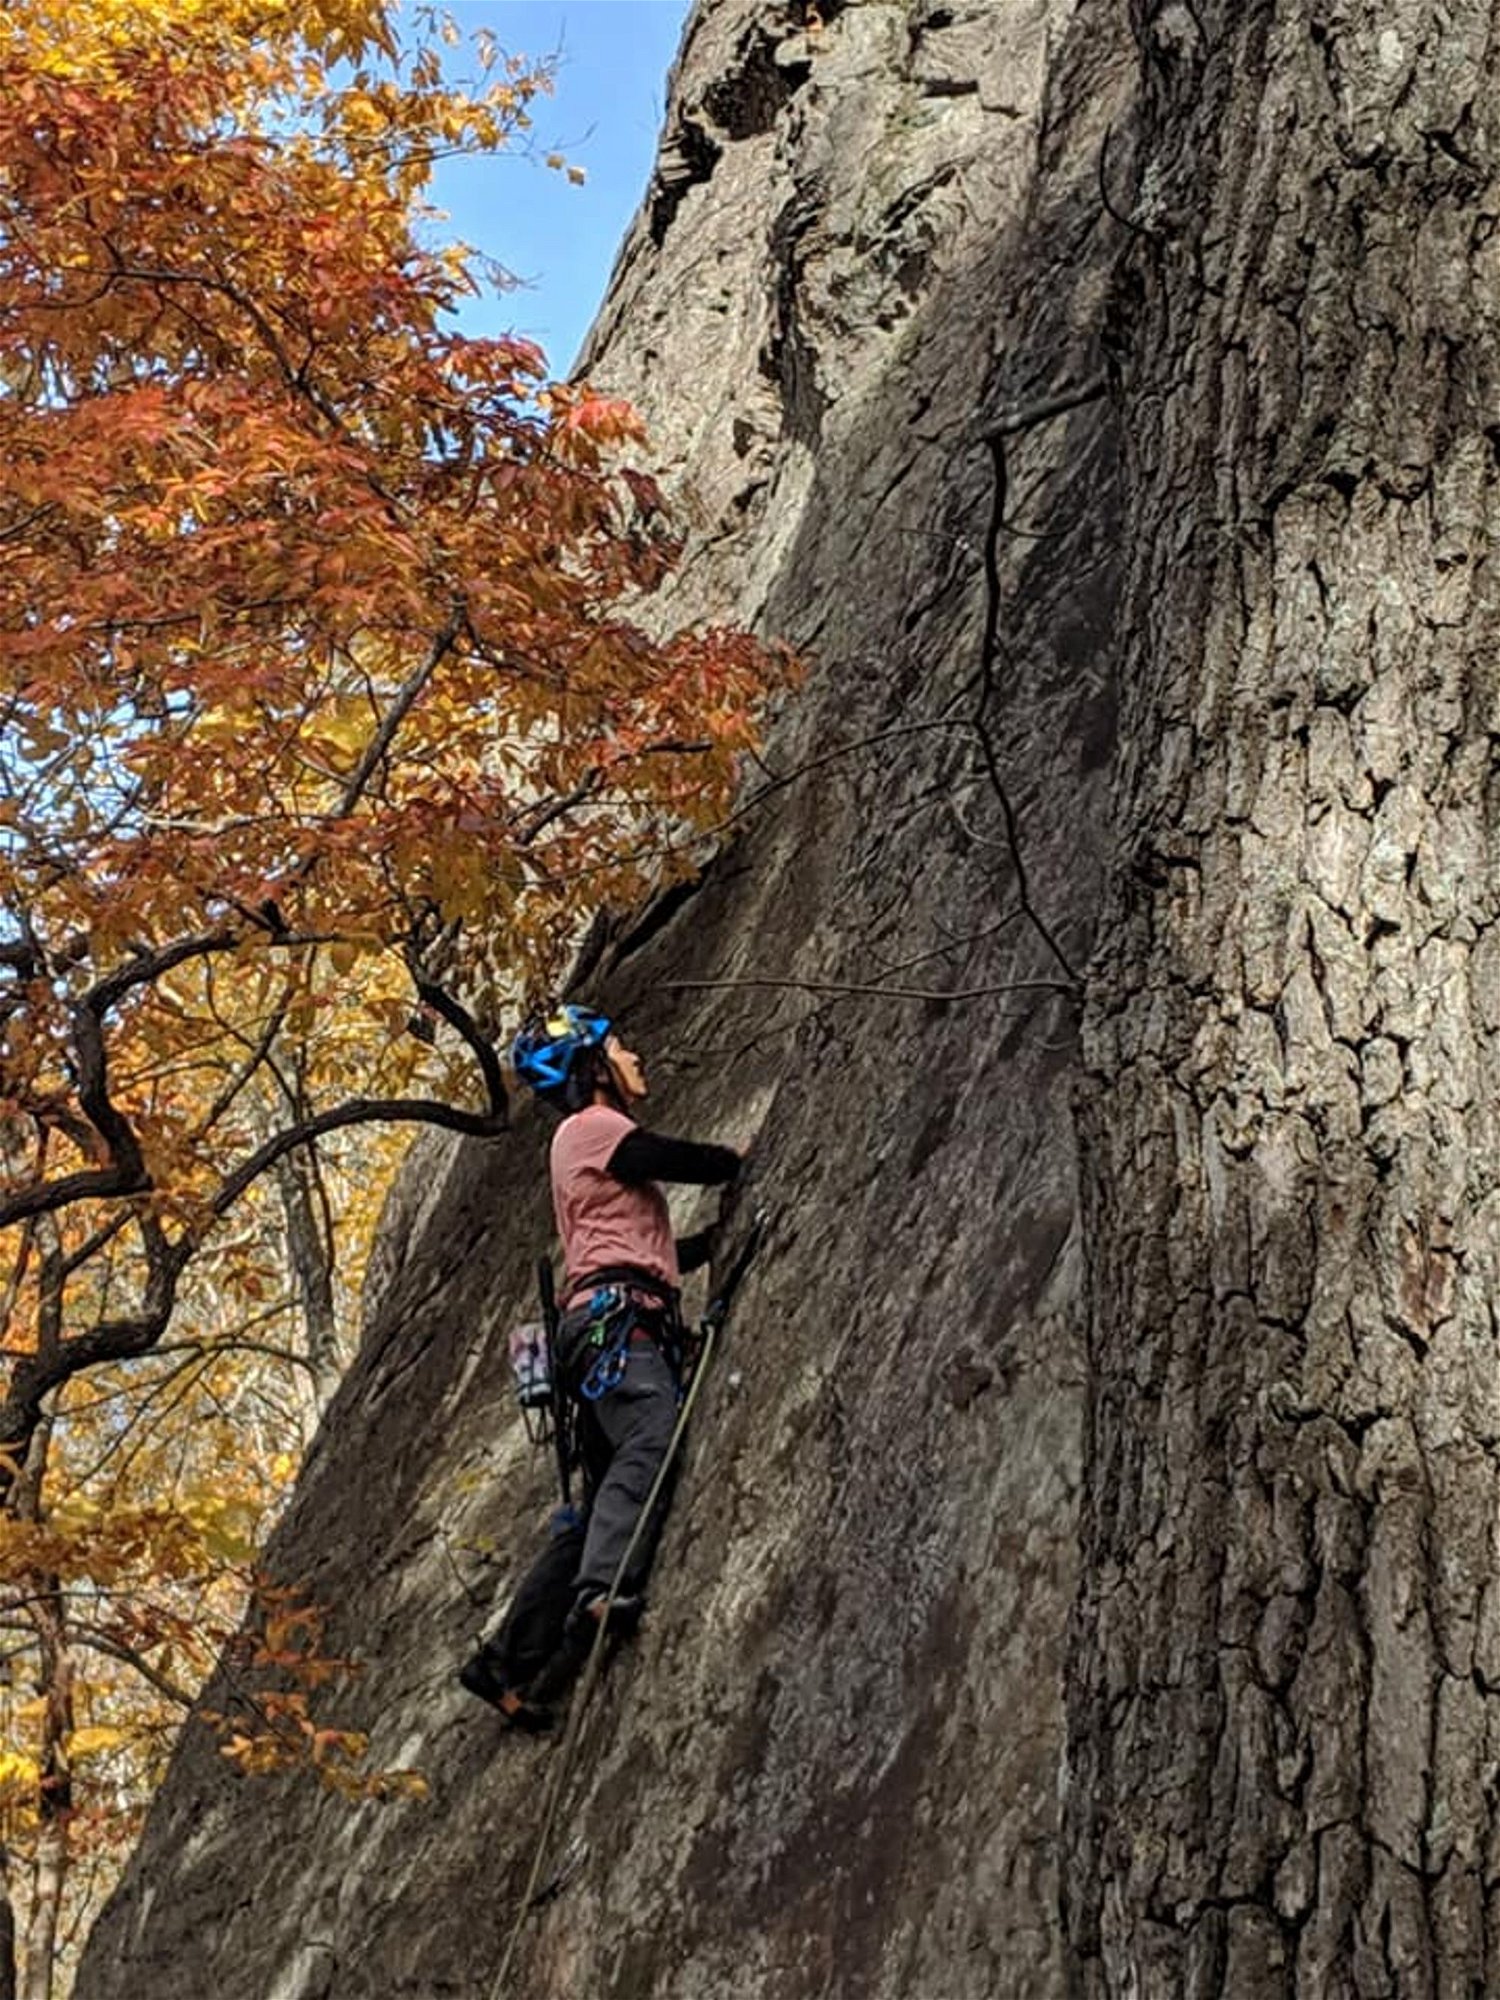 Rock climbing in the Red River Gorge, Kentucky